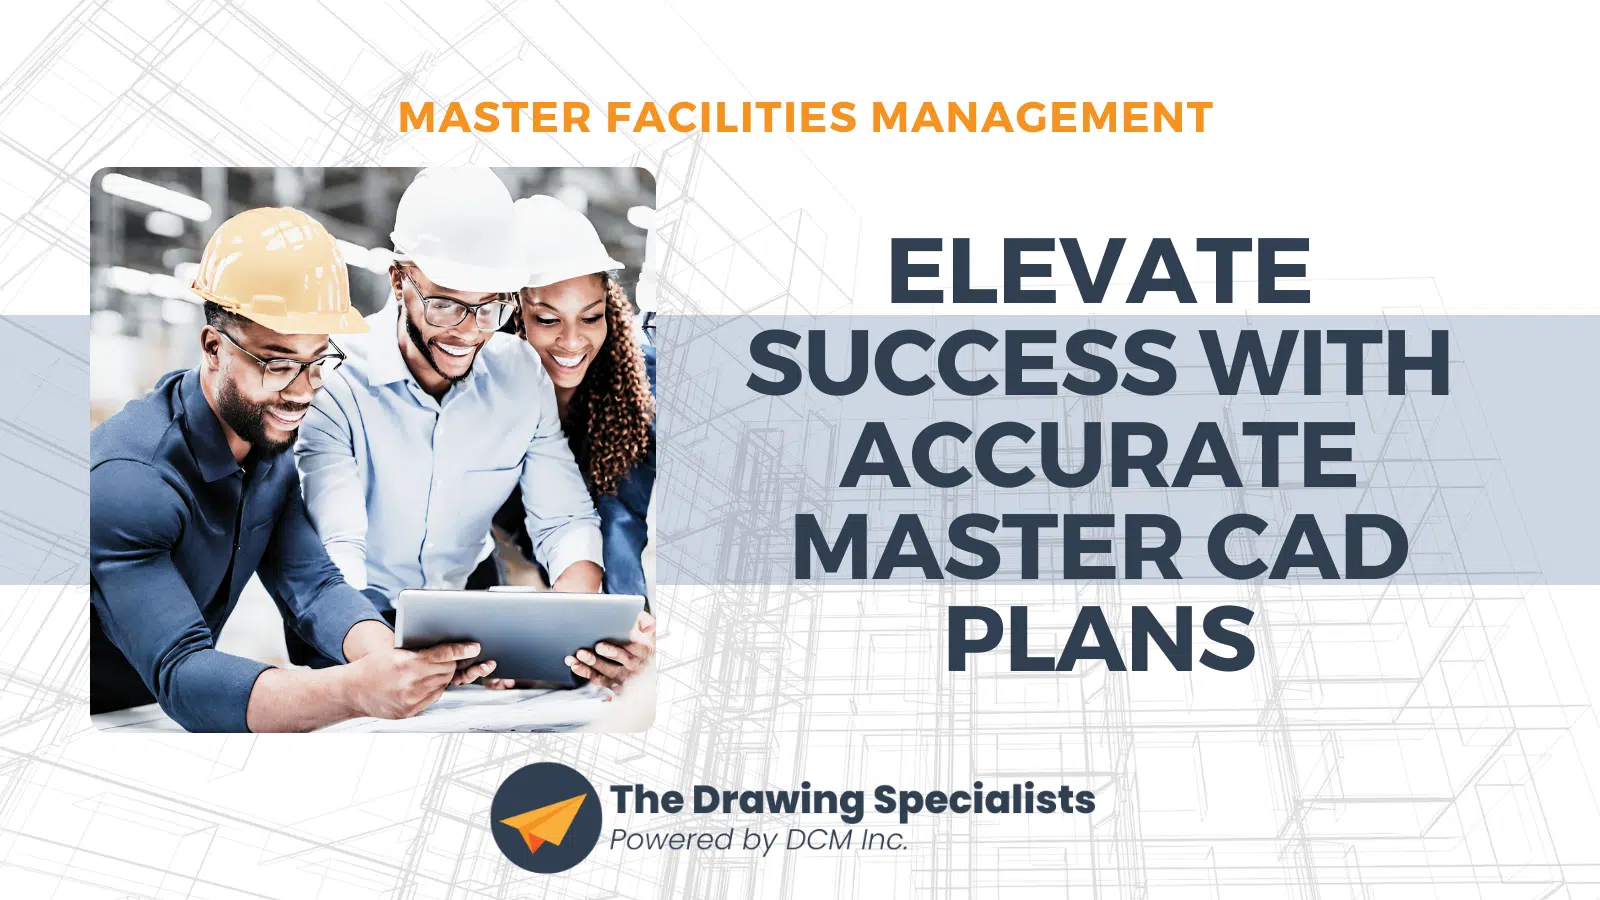 Mastering Facilities Management: Elevate Success with Accurate Master CAD Plans